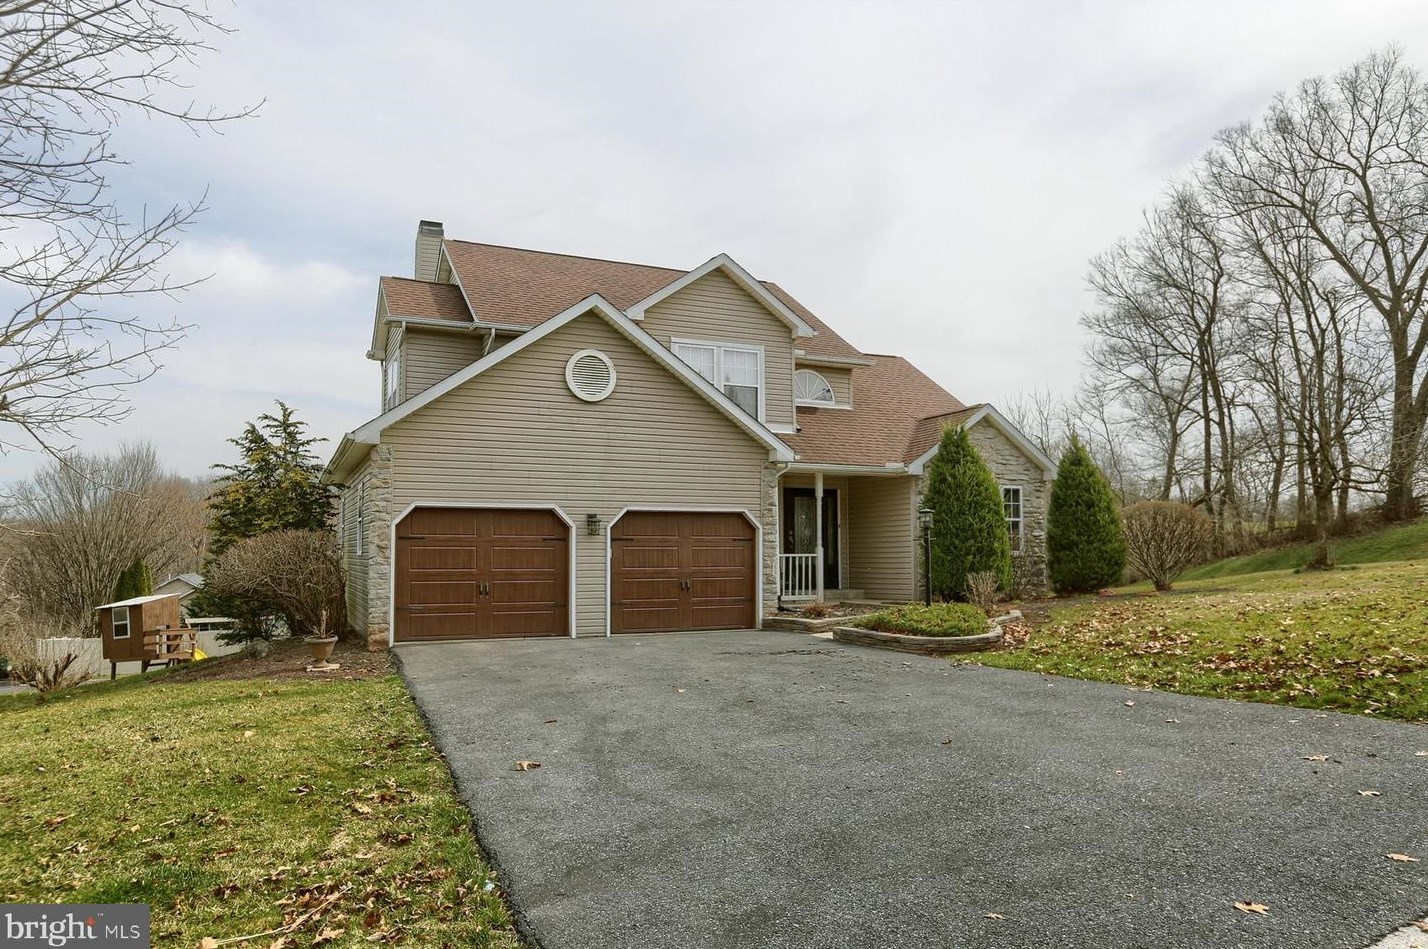 20 Turnberry Dr, Etters, PA 17319